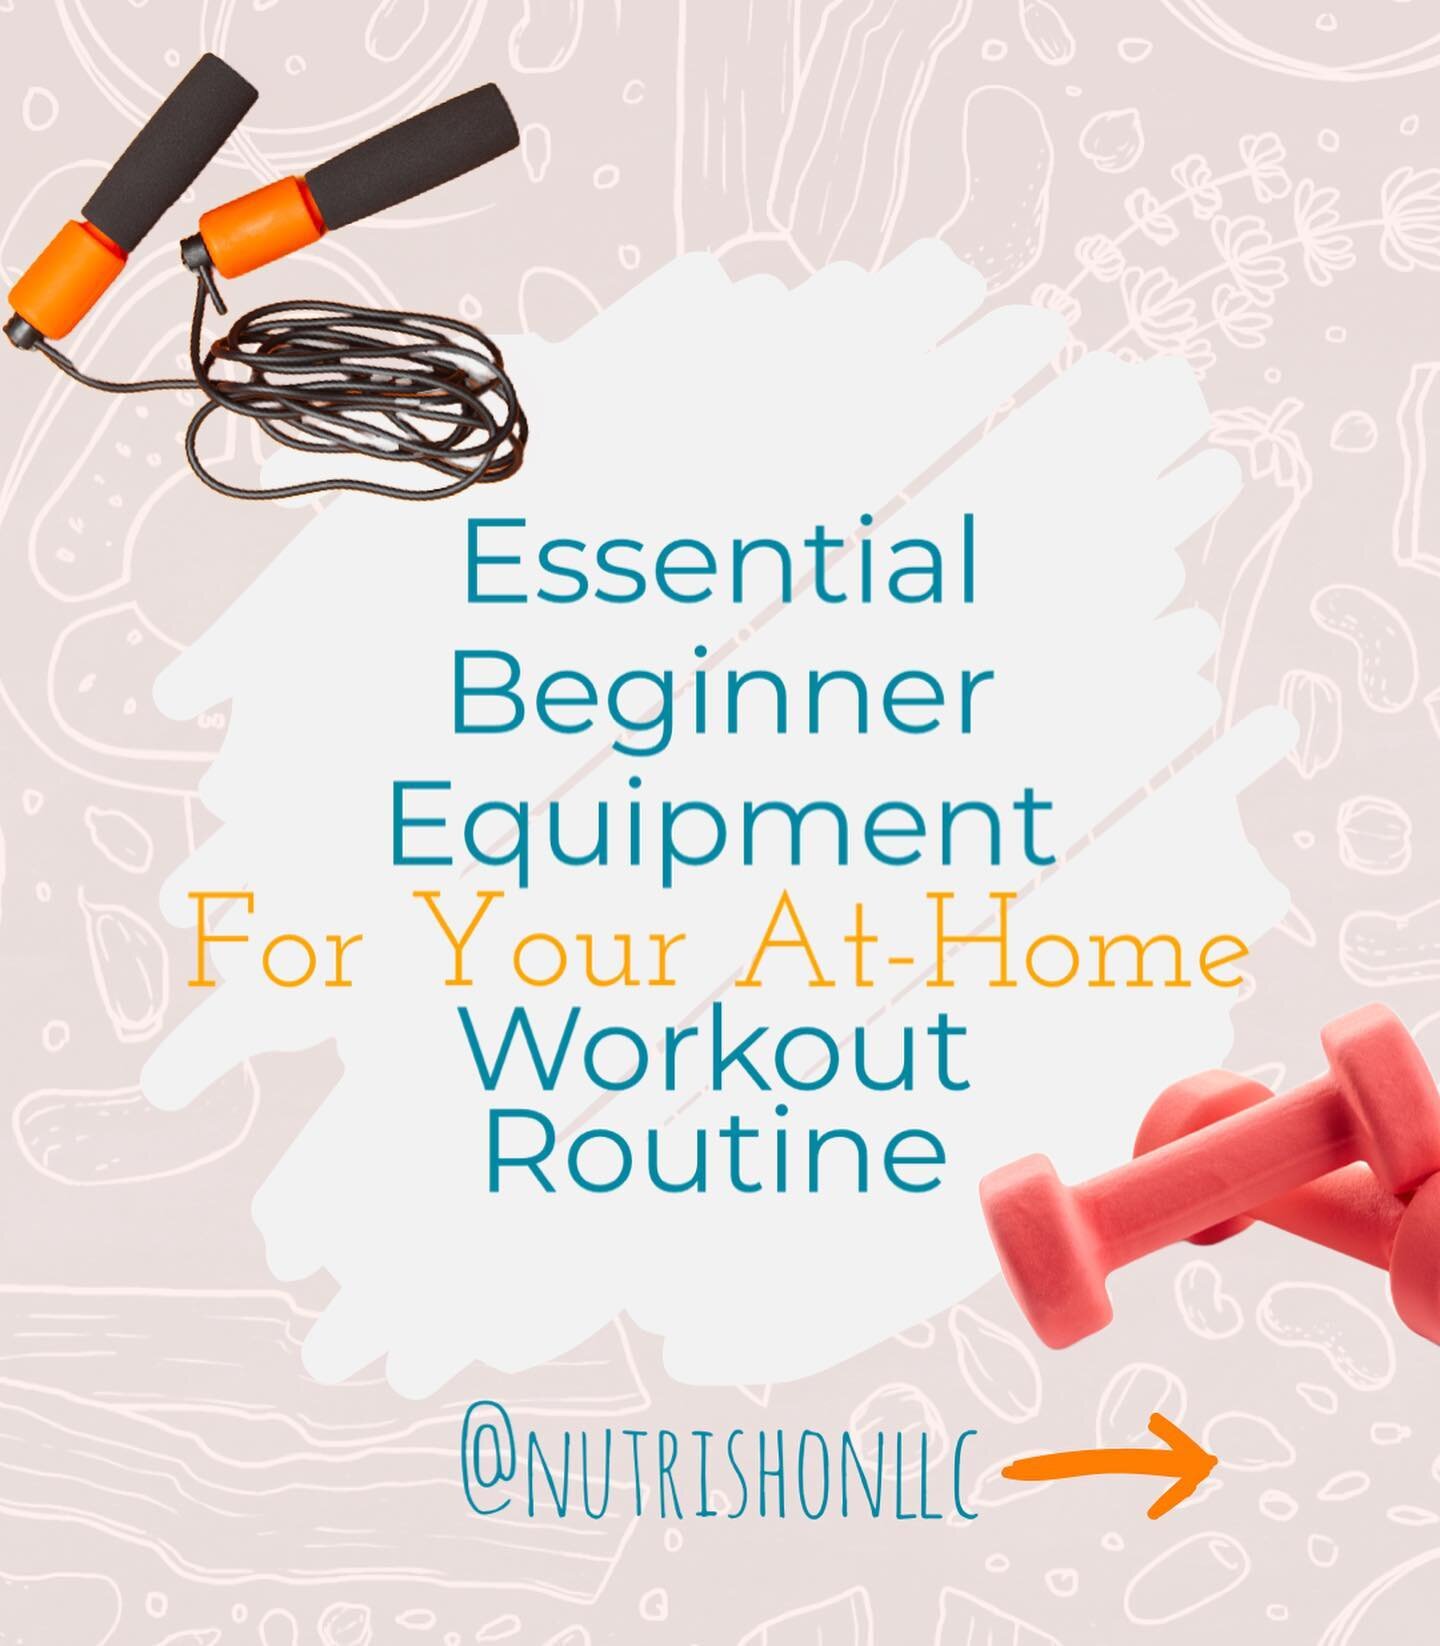 ❤️ this post if you&rsquo;re ready to get your home workout routine started!

Haven&rsquo;t got the time or the drive to go to the gym? 
That&rsquo;s okay! With a few simple pieces of equipment, you can get in great workouts right from your home!

Th